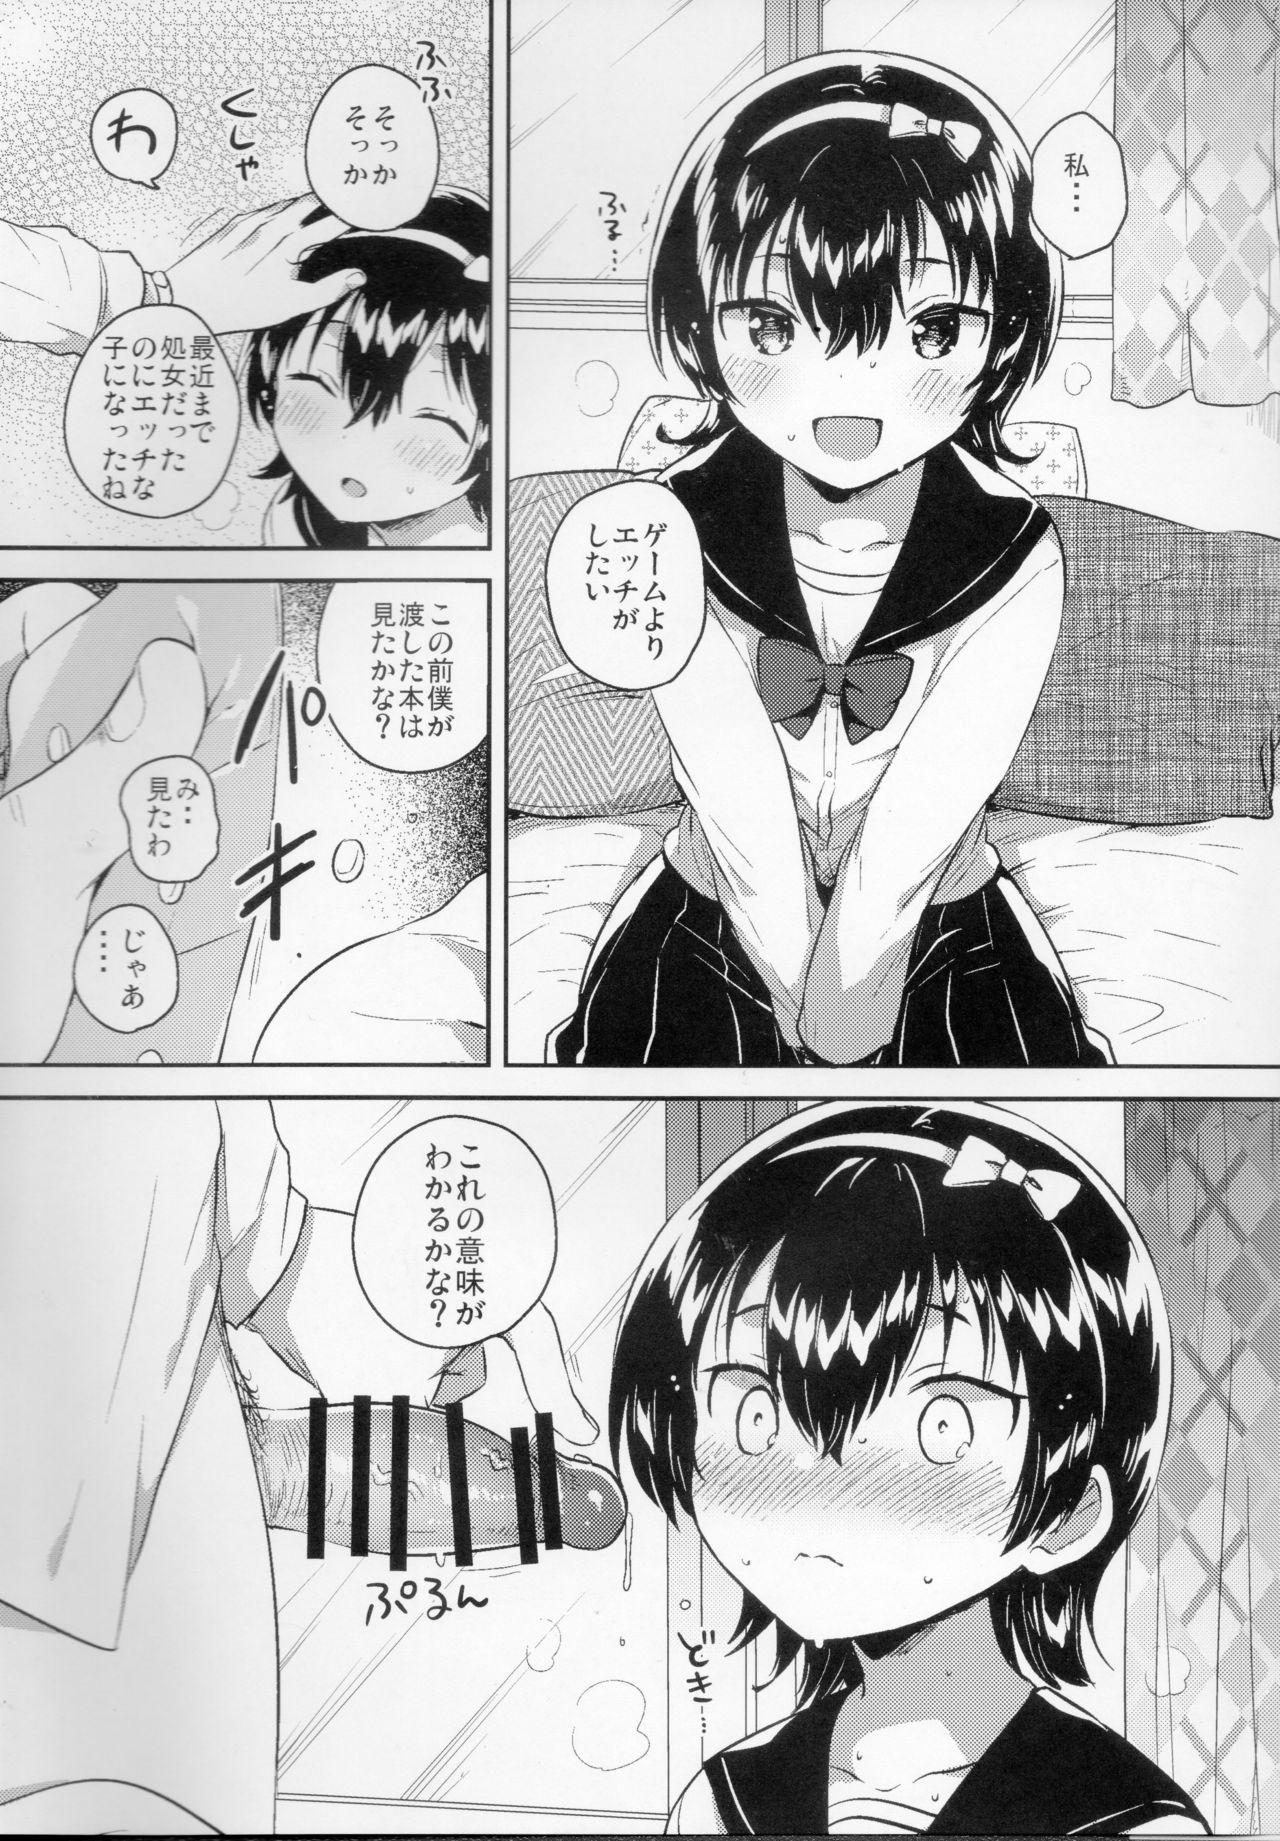 Black Hair Anoko wa Marionette - She Is marionette - Original Bisexual - Page 8